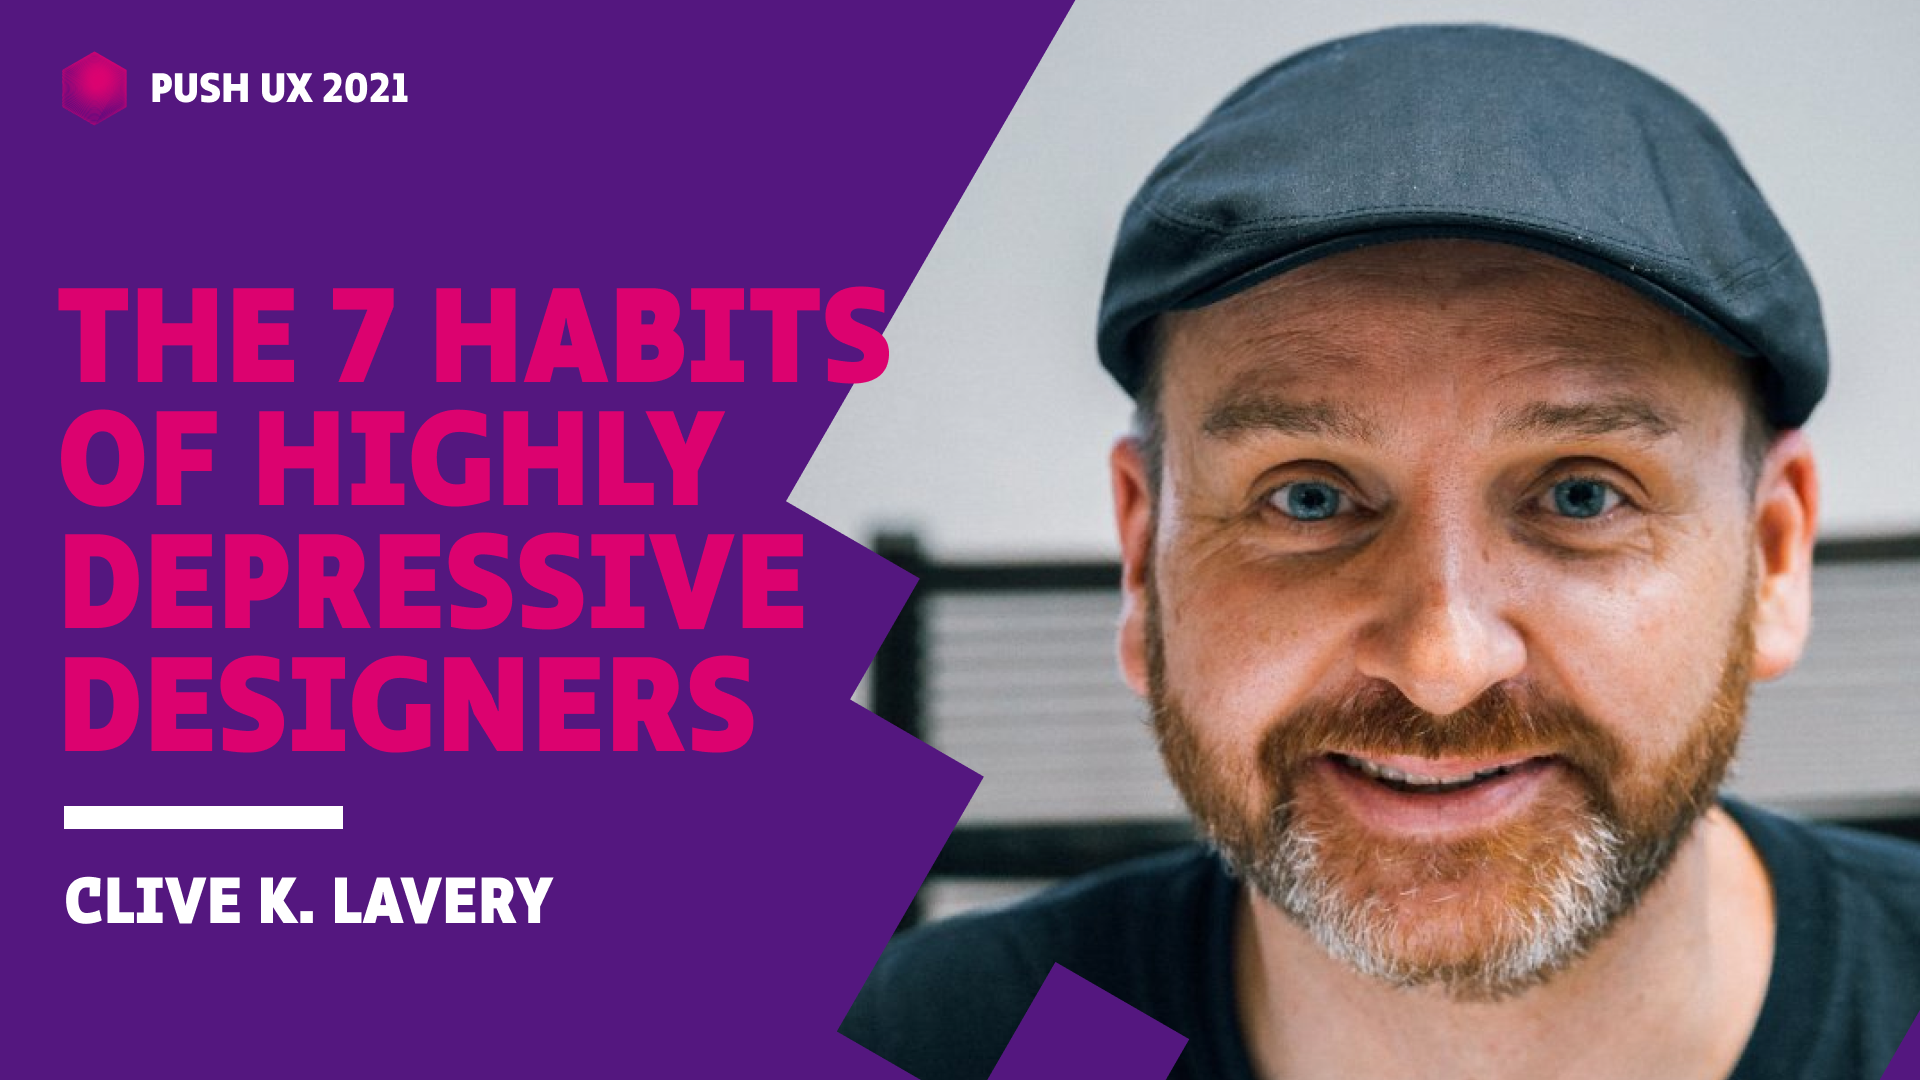 The 7 Habits of Highly Depressive Designers